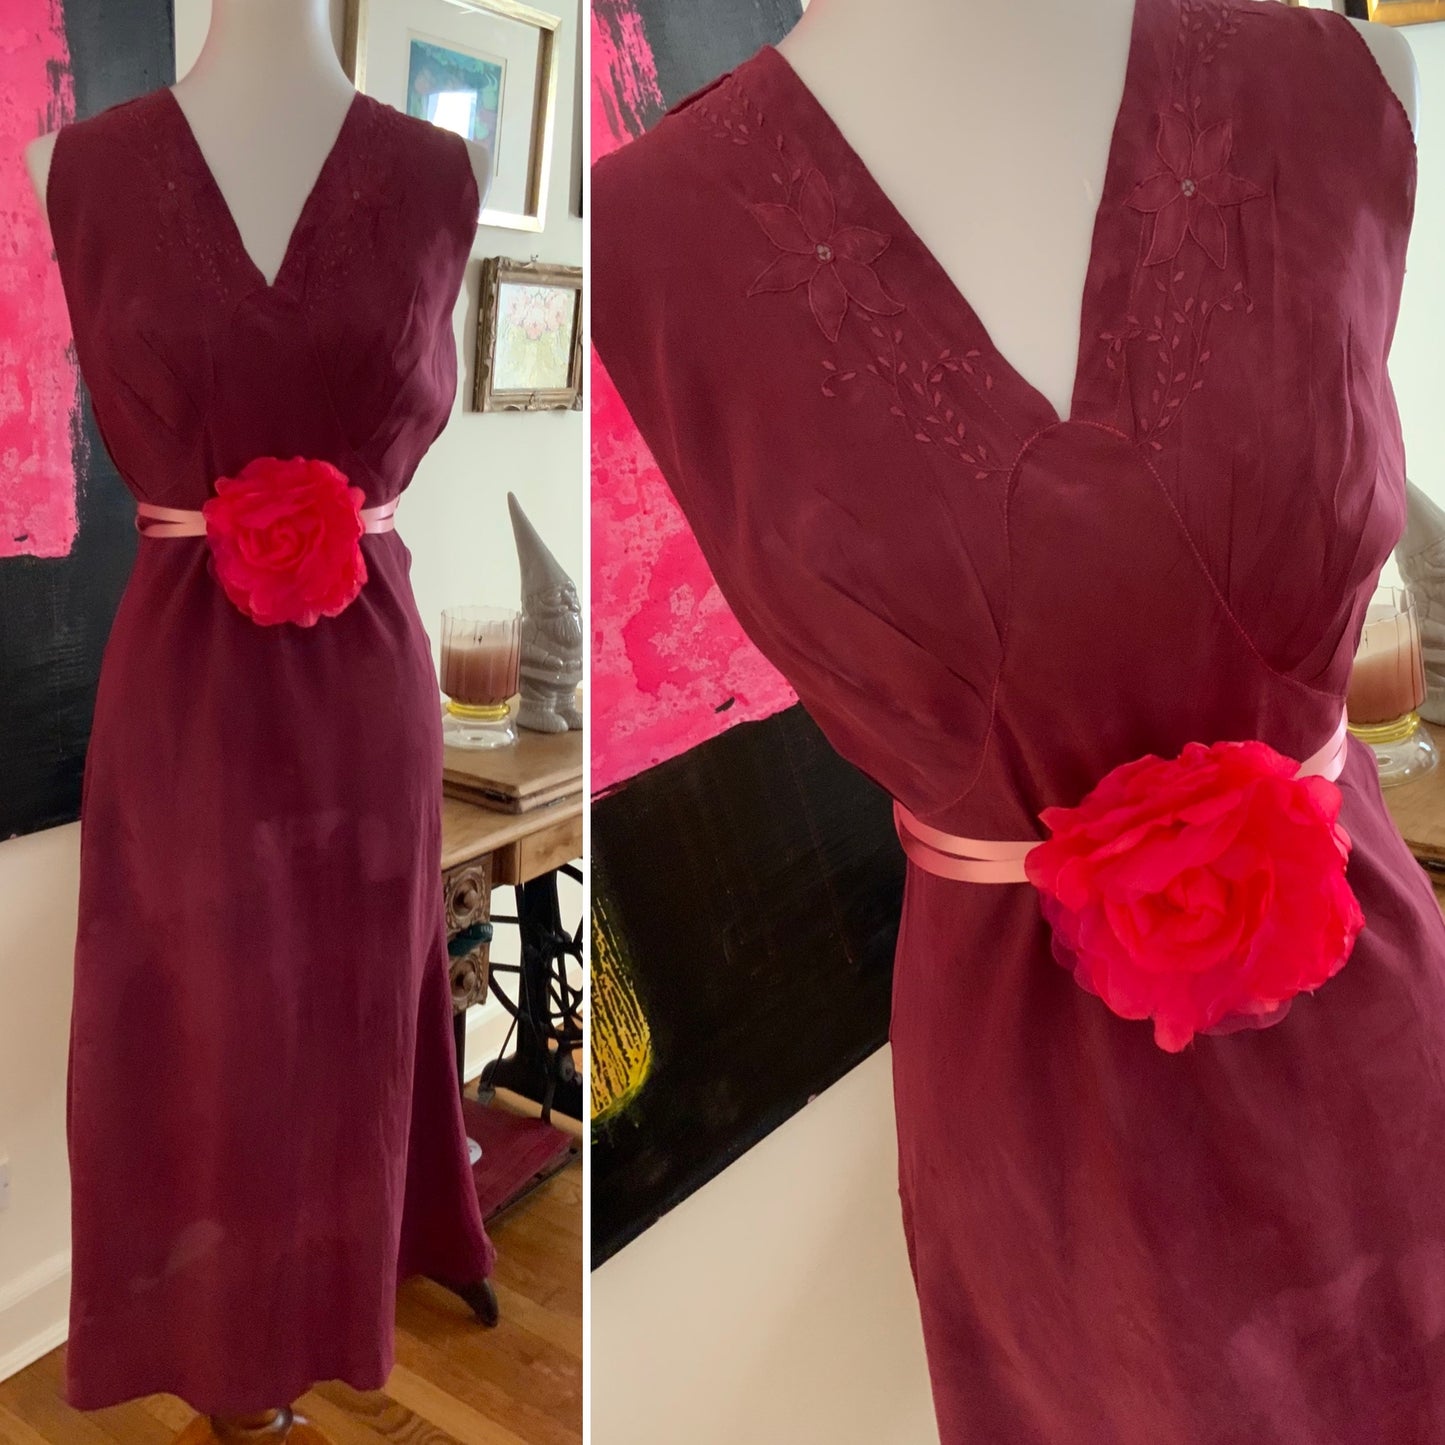 Hand Dyed Nightgown / Slip Dress - 50s